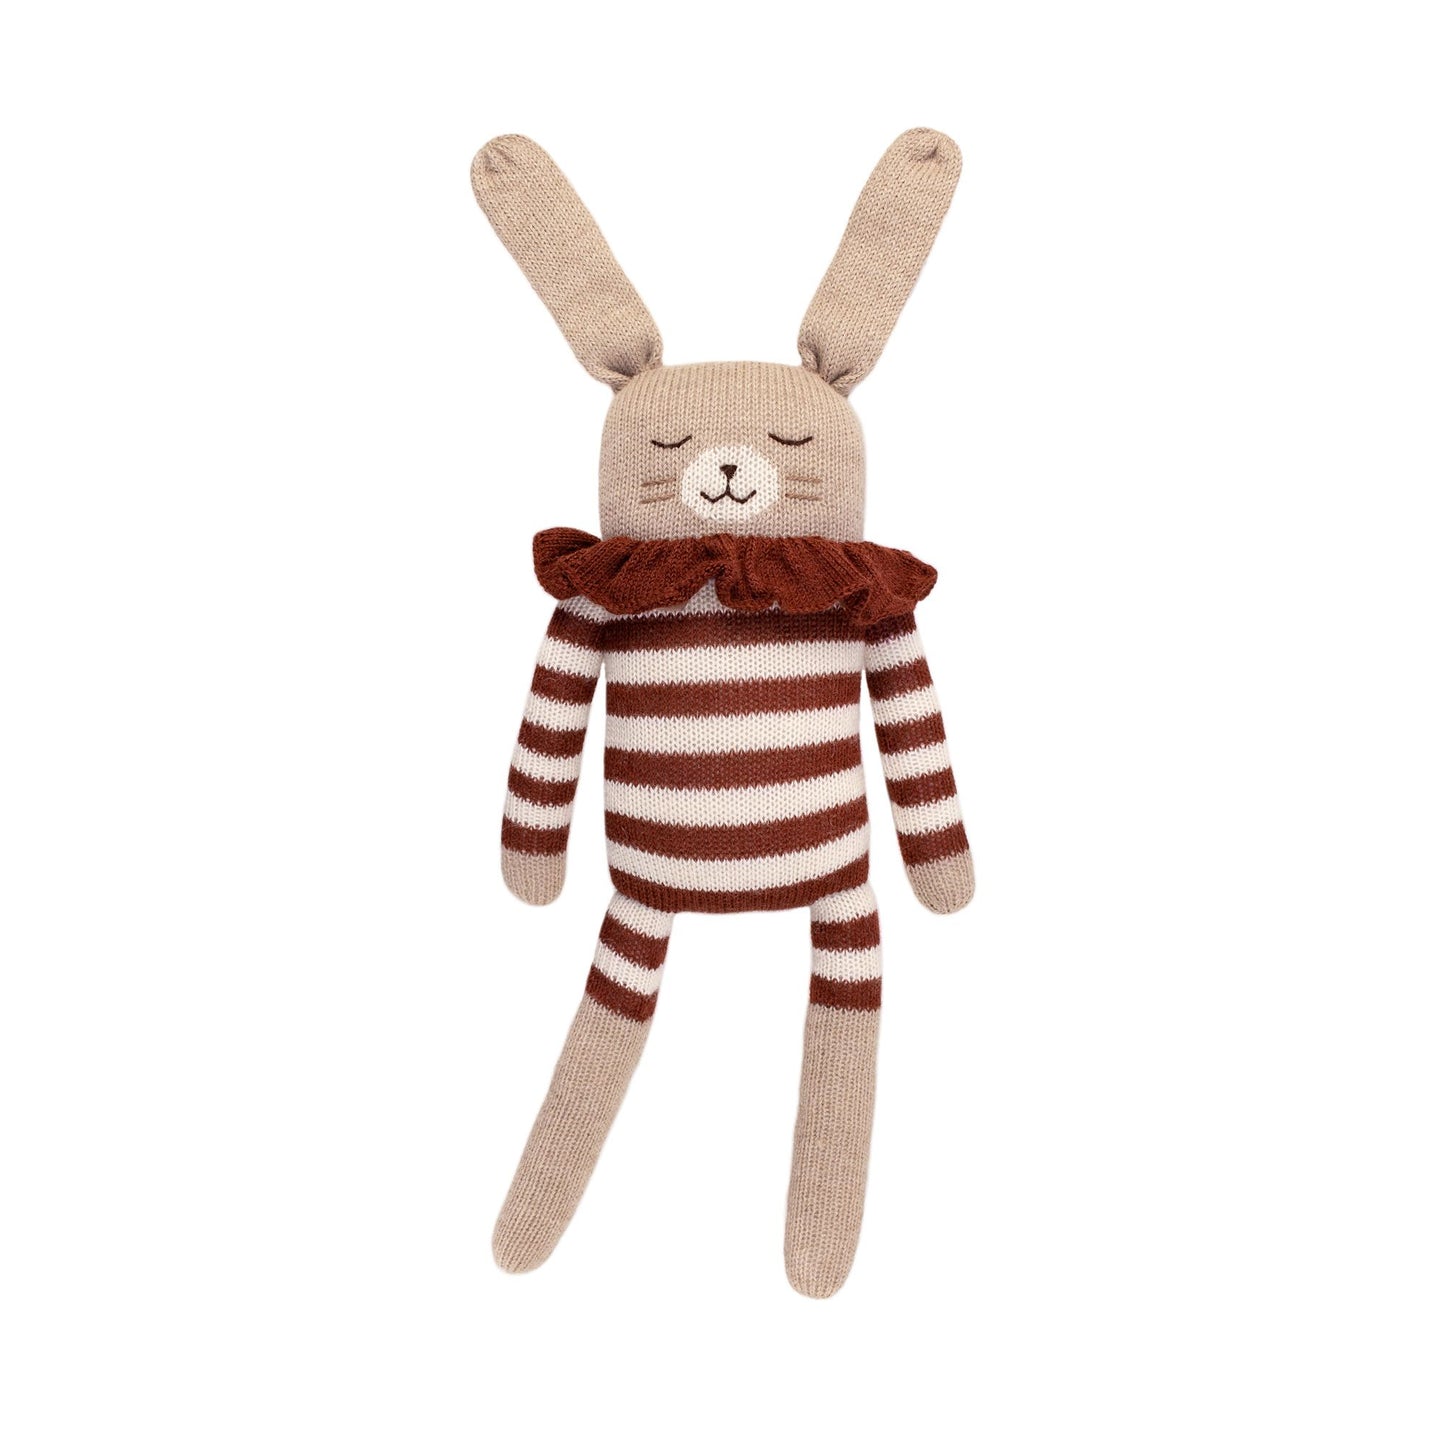 Grand doudou lapin combishort rayé sienne